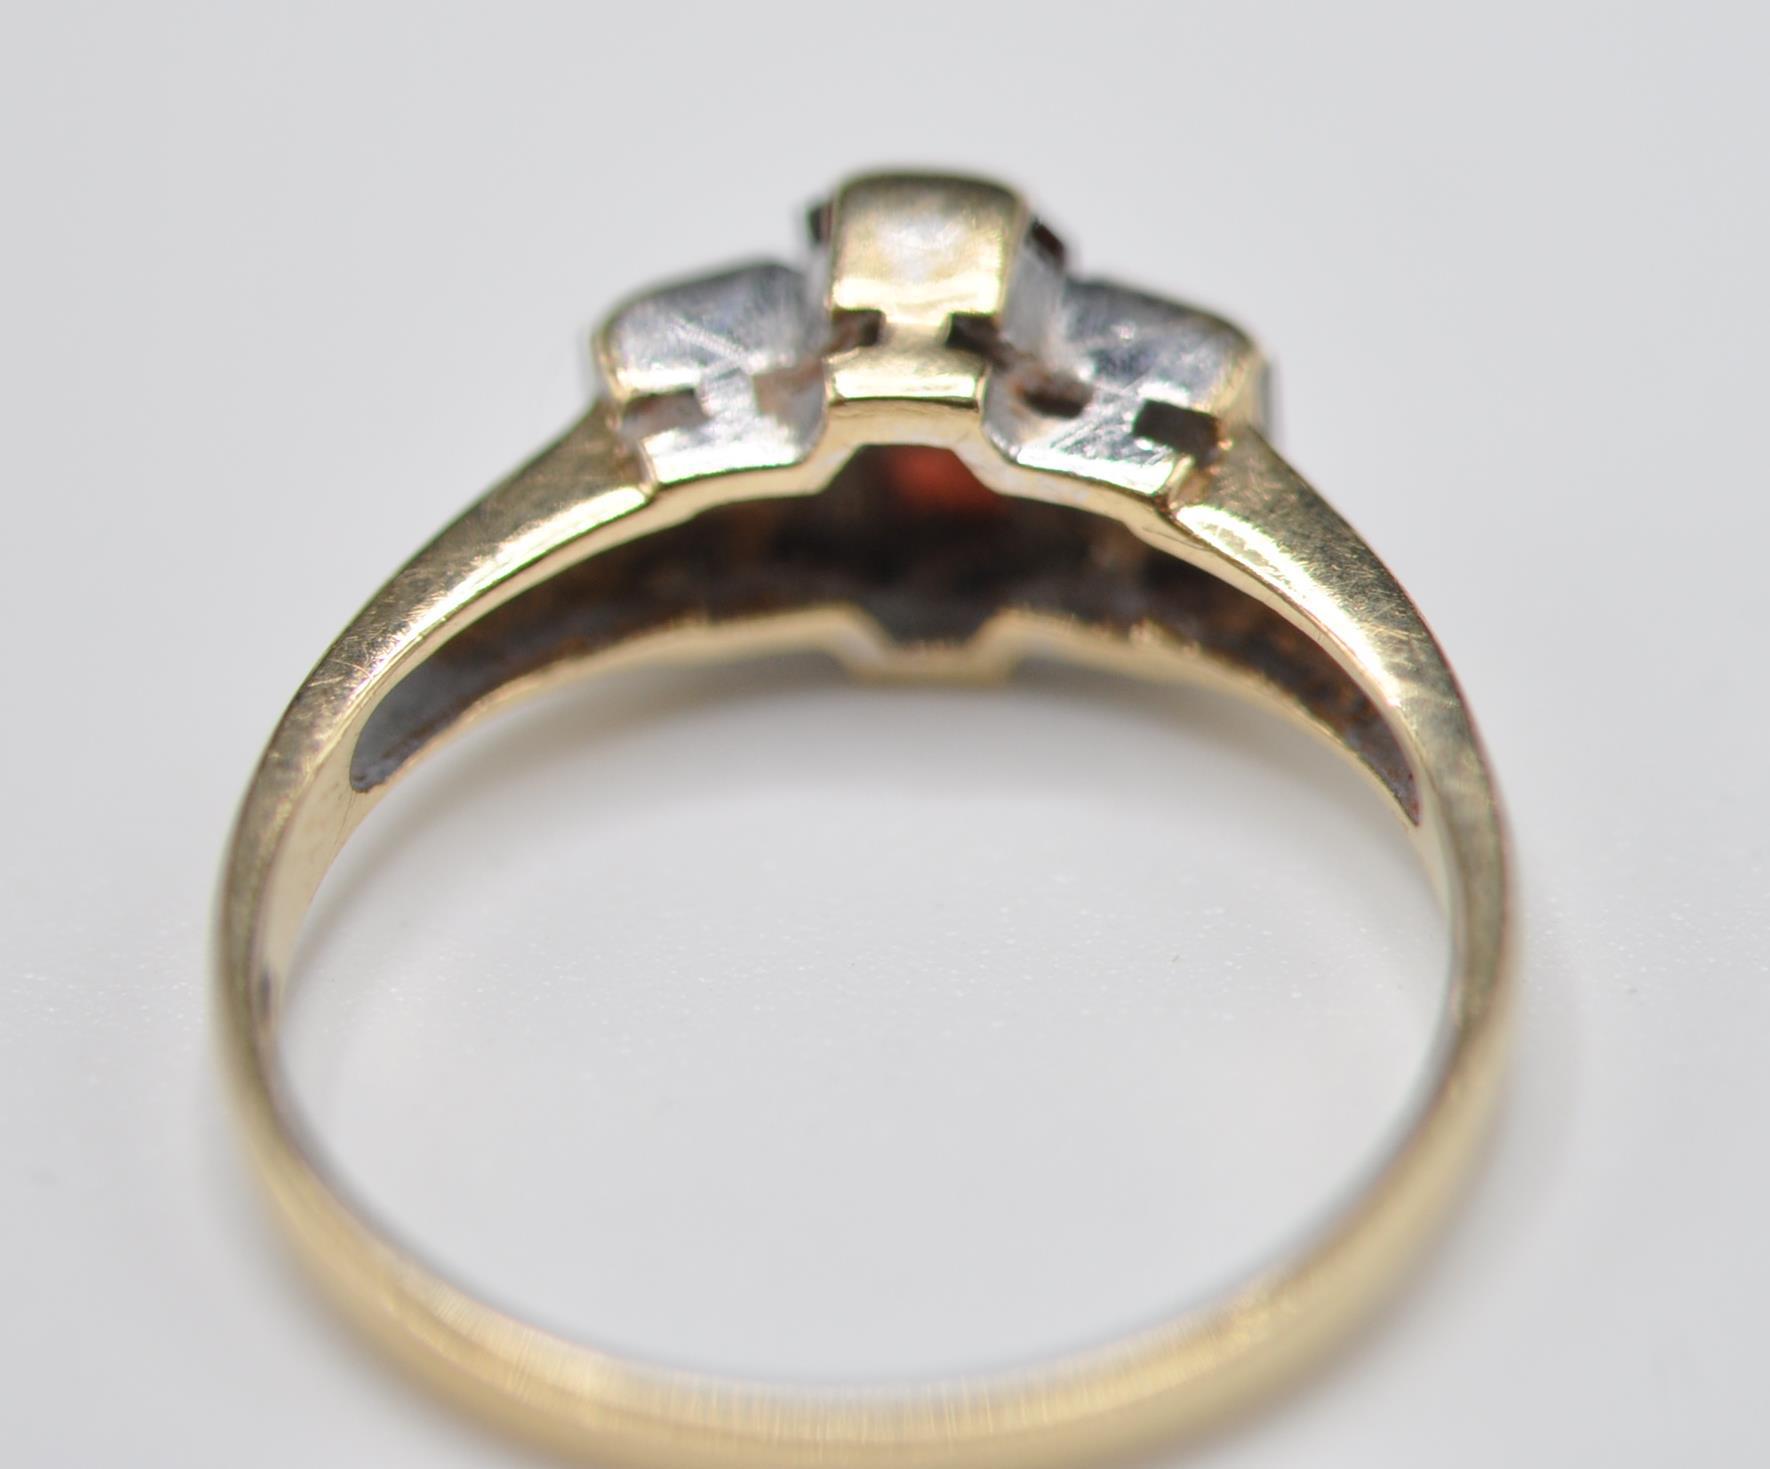 9CT GOLD THREE STONE RING SET WITH RED AND WHITE STONES - Image 4 of 5